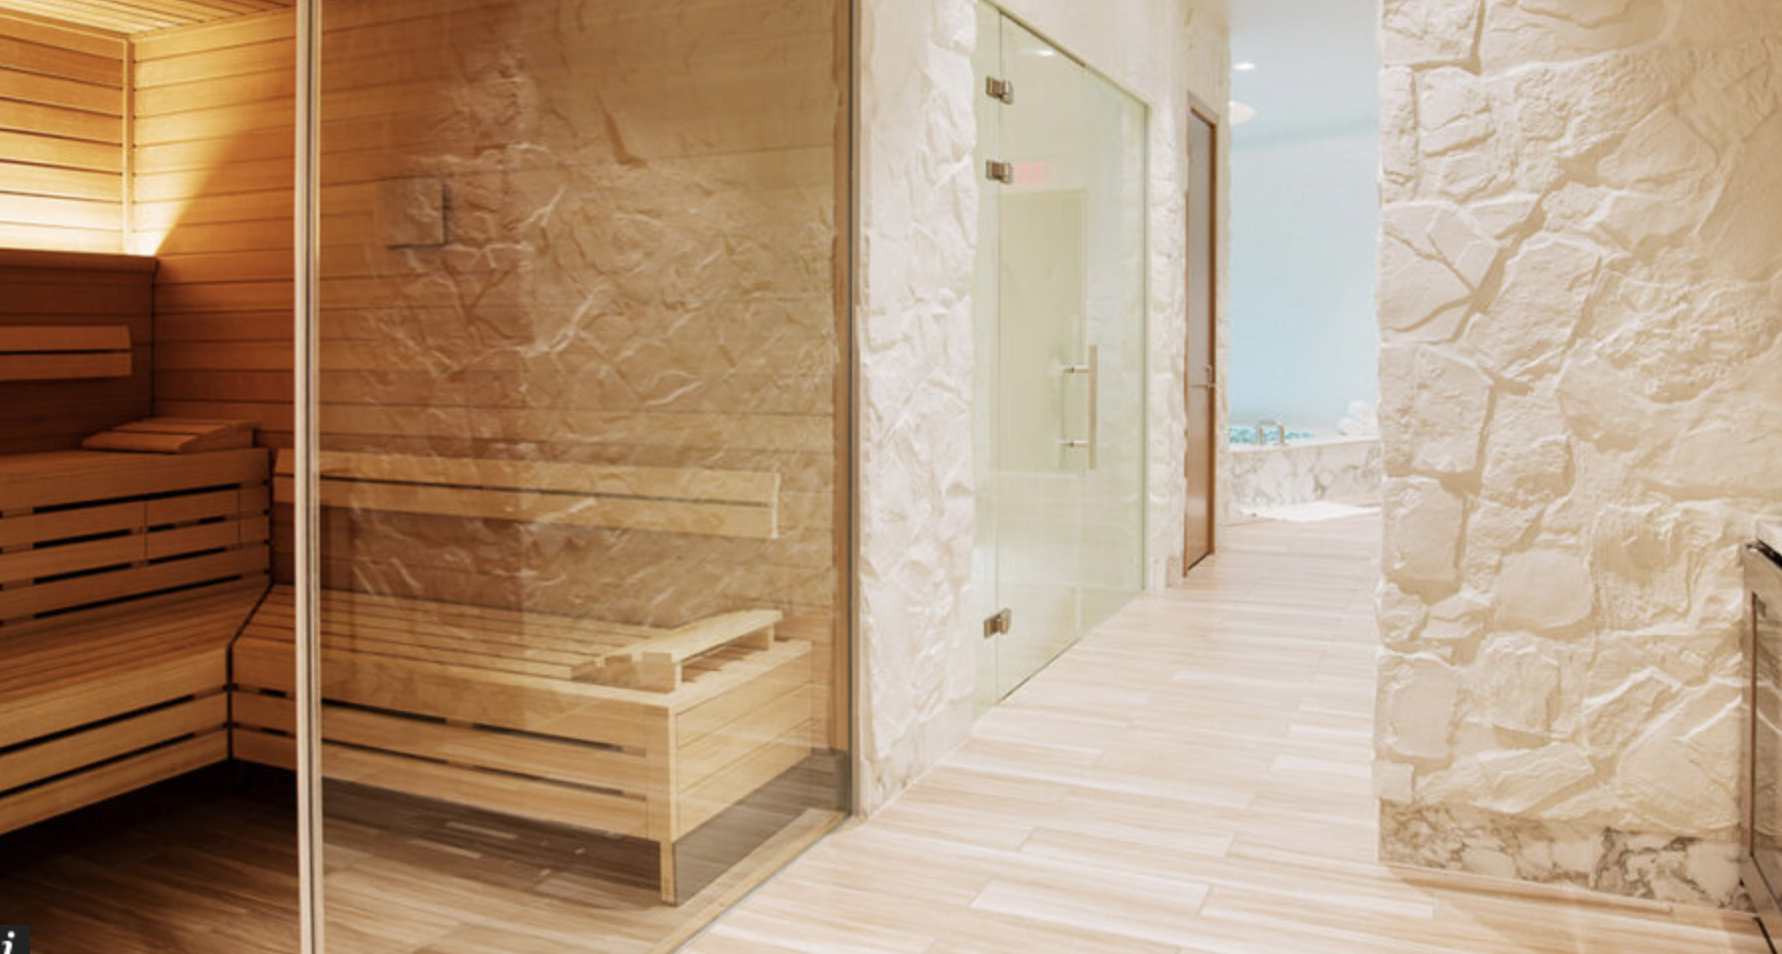 Luxury Spa in Las Vegas, Nevada at Palms. The Spa at Palms is a luxury spa with 17,000 sq. ft. of elegant beauty featuring three levels to fully treat yourself. Full servce spa, fitness center, Zen Studio for Yoga and more than 15 treatment sanctuaries.